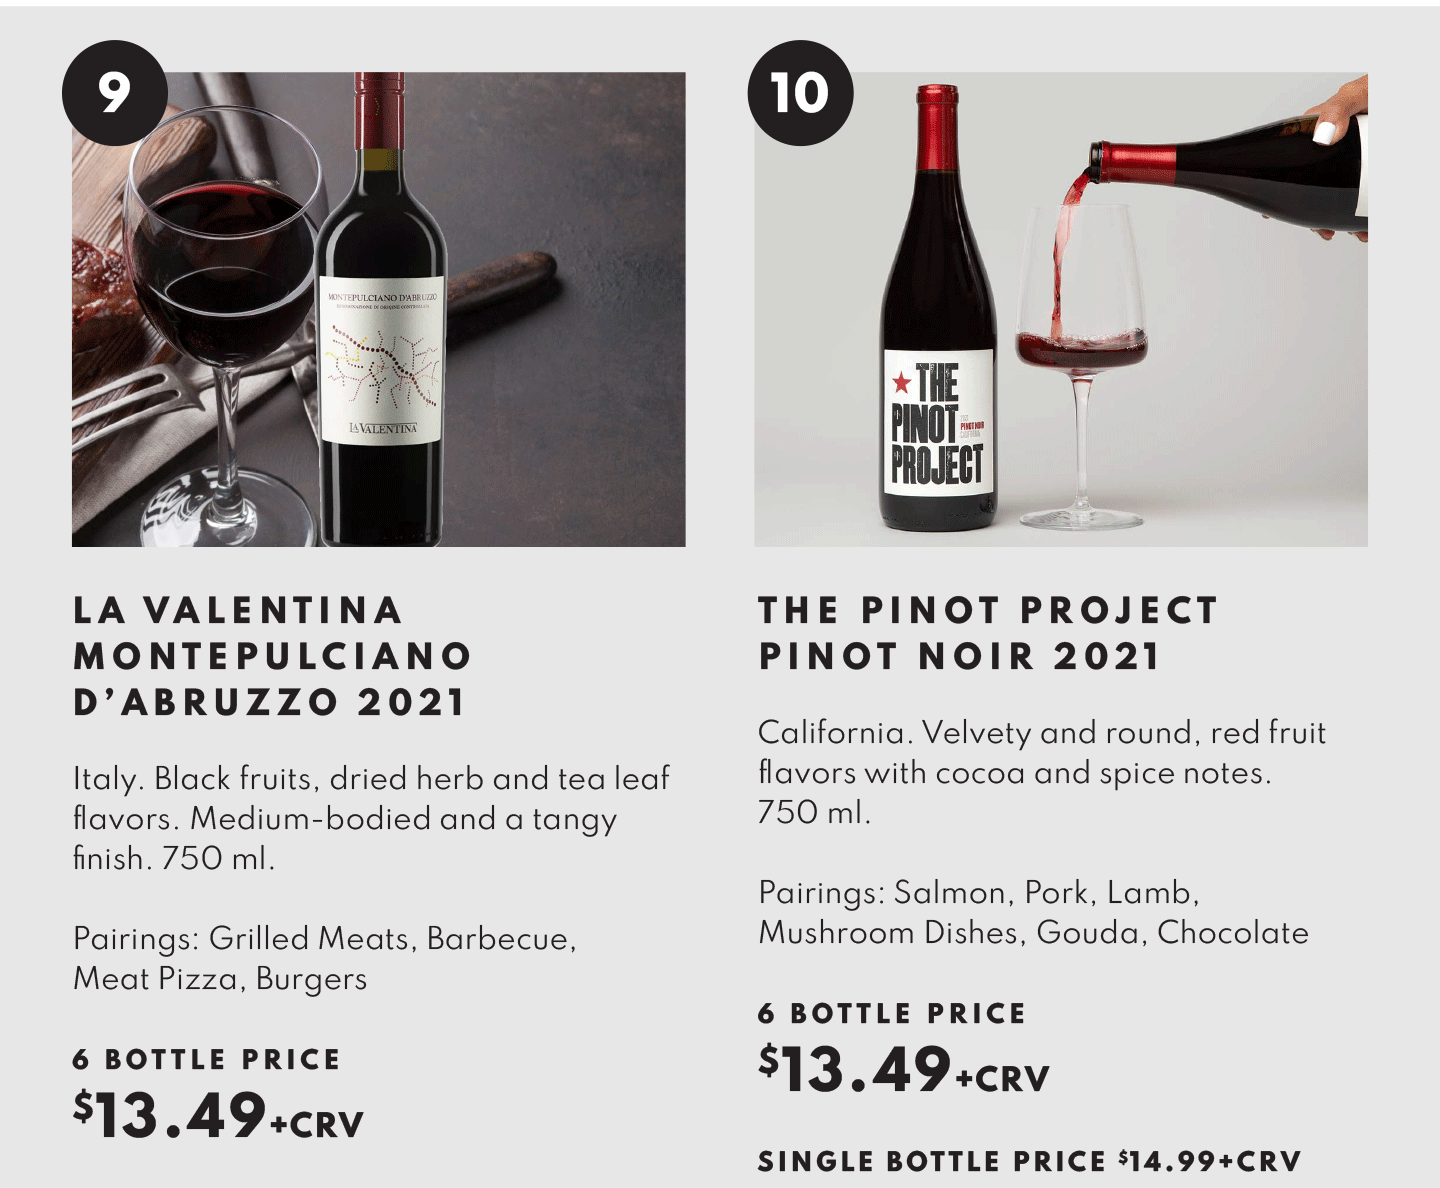 La Valentina Montepulciano D'Abruzzo 2021 $13.49 - 6 bottle price and The Pinot Project Pinot Noir $2021 - 6 bottle price